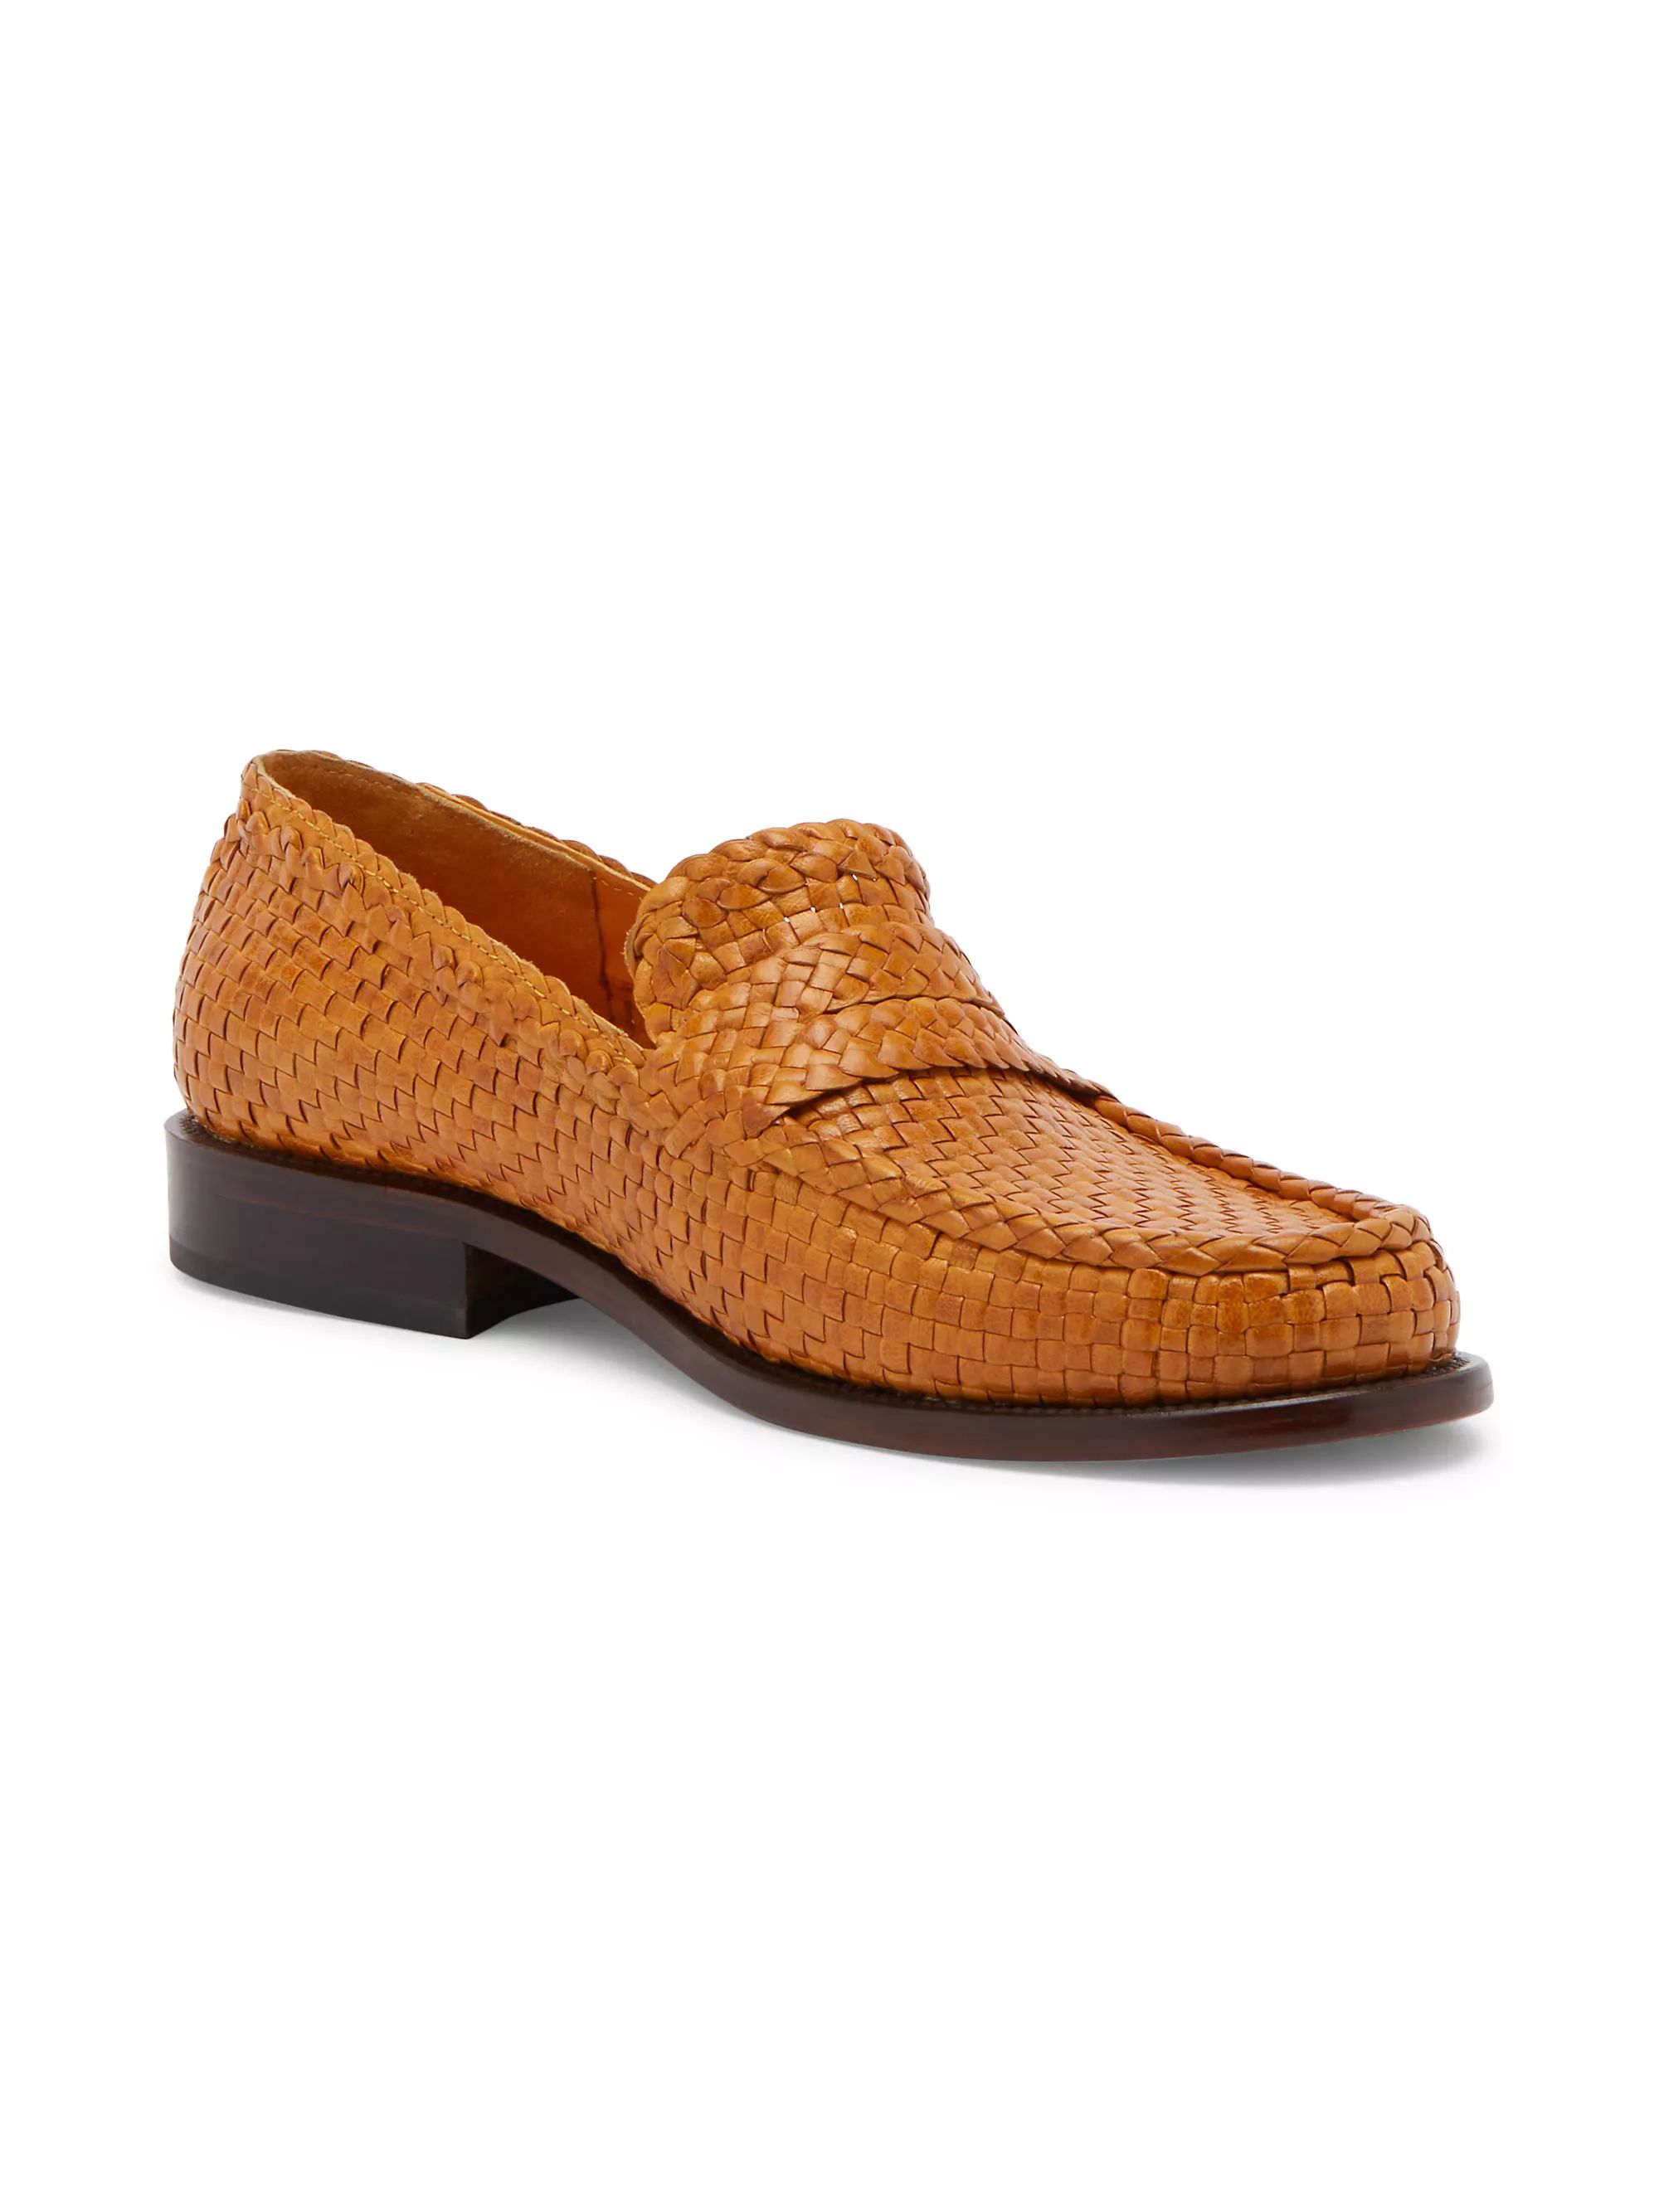 Loom Leather Moccasin Loafers | Saks Fifth Avenue